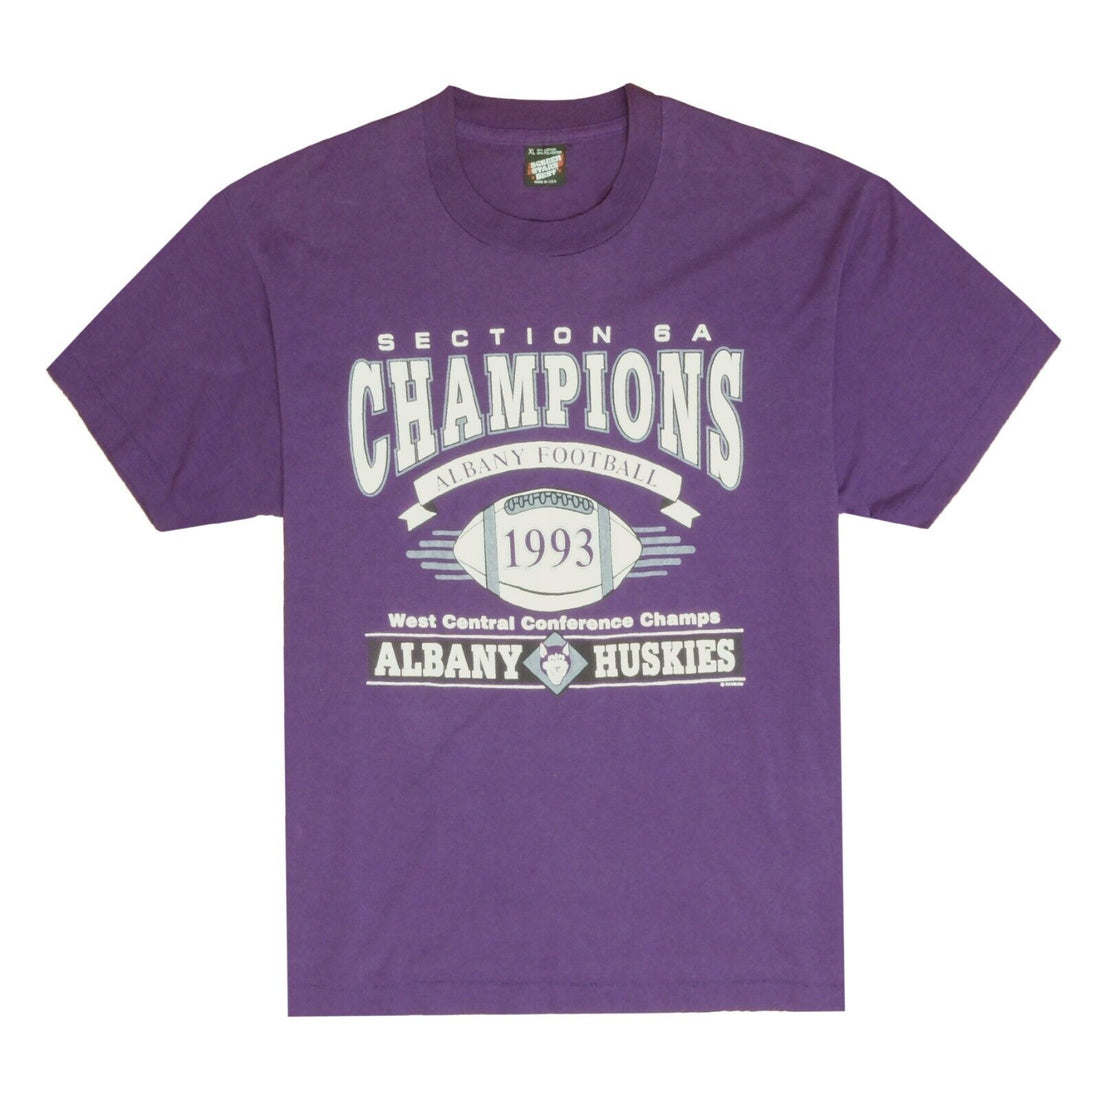 Vintage Albany Huskies 1993 Section 6A Champs T-Shirt Size XL 90s Football